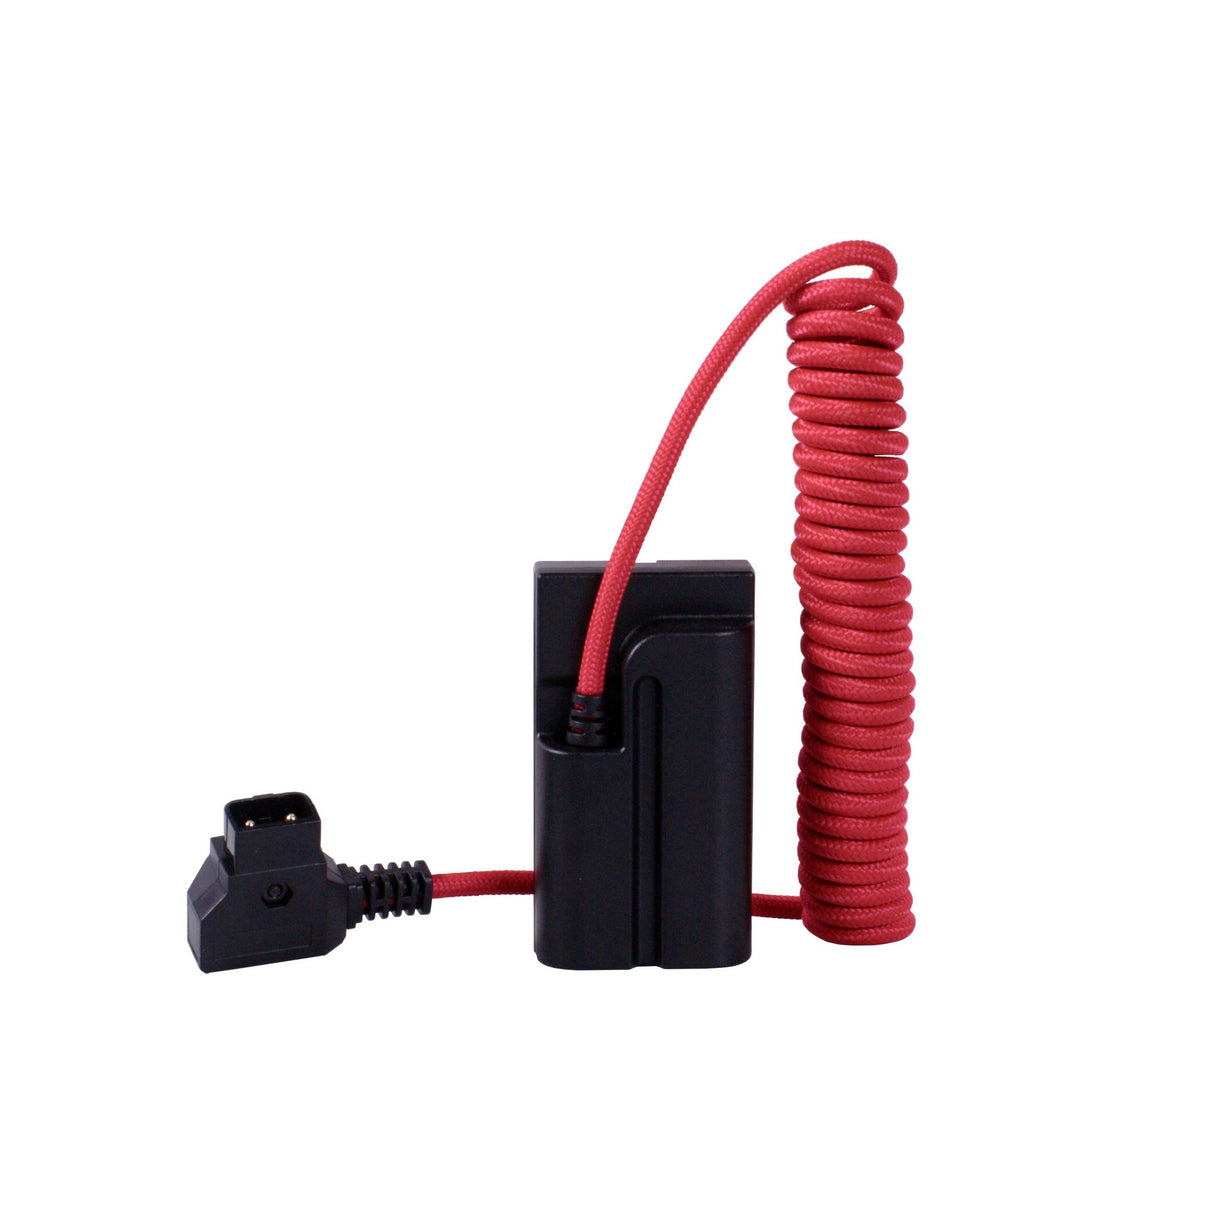 1SV D-TAP to Sony L Series Dummy Battery NPF Coiled Cable, 16-36-Inches, Red